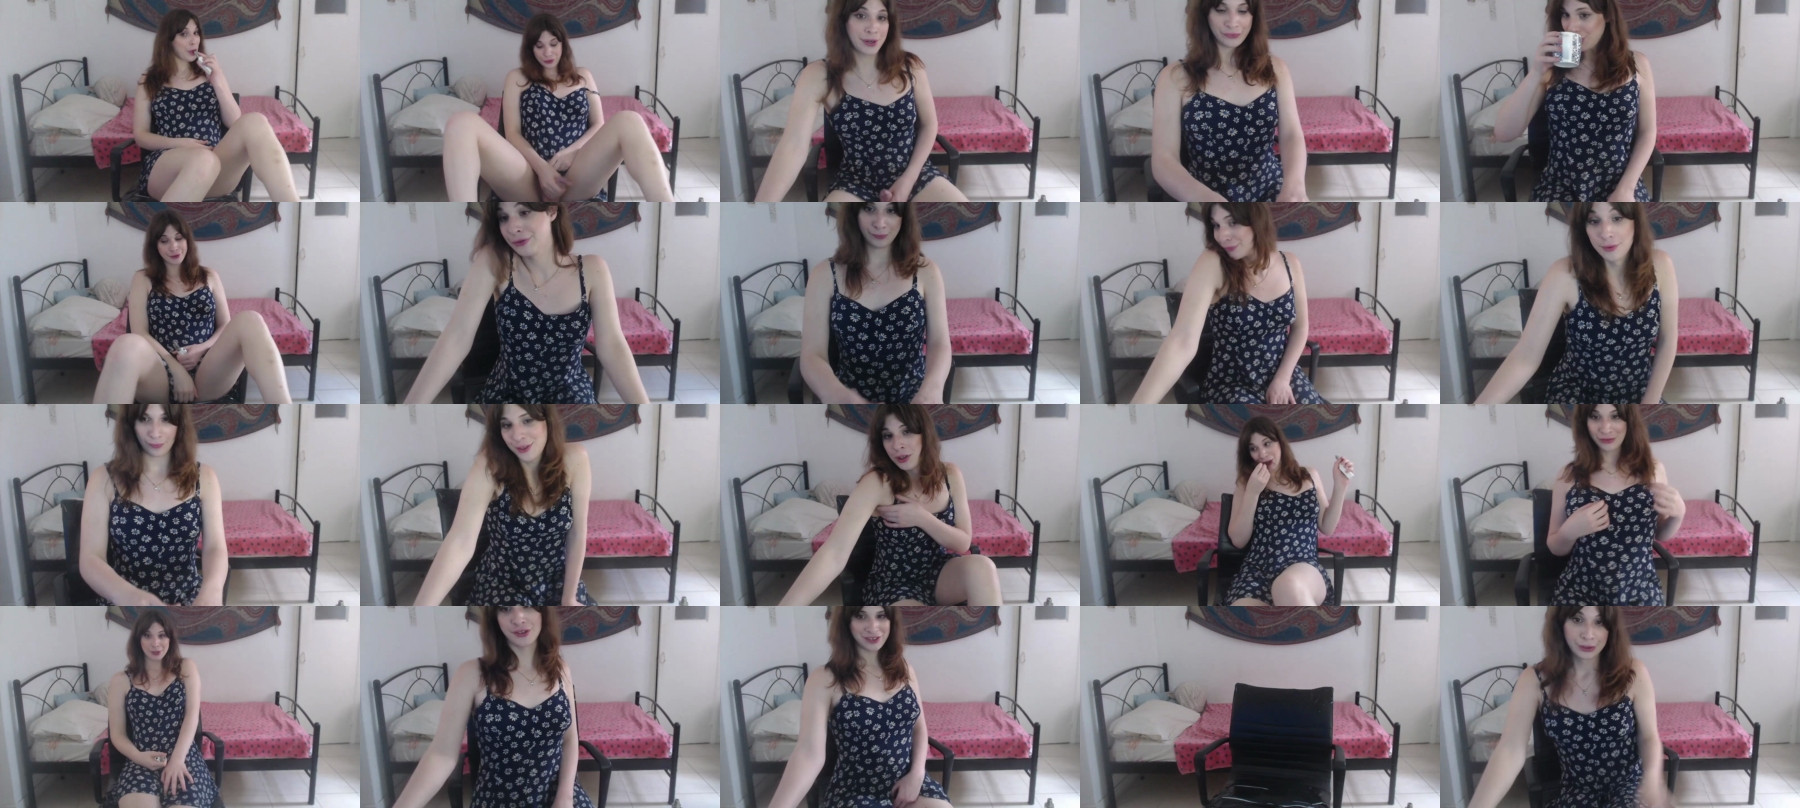 I_Miss_Behave ts 25-04-2021  trans Nude